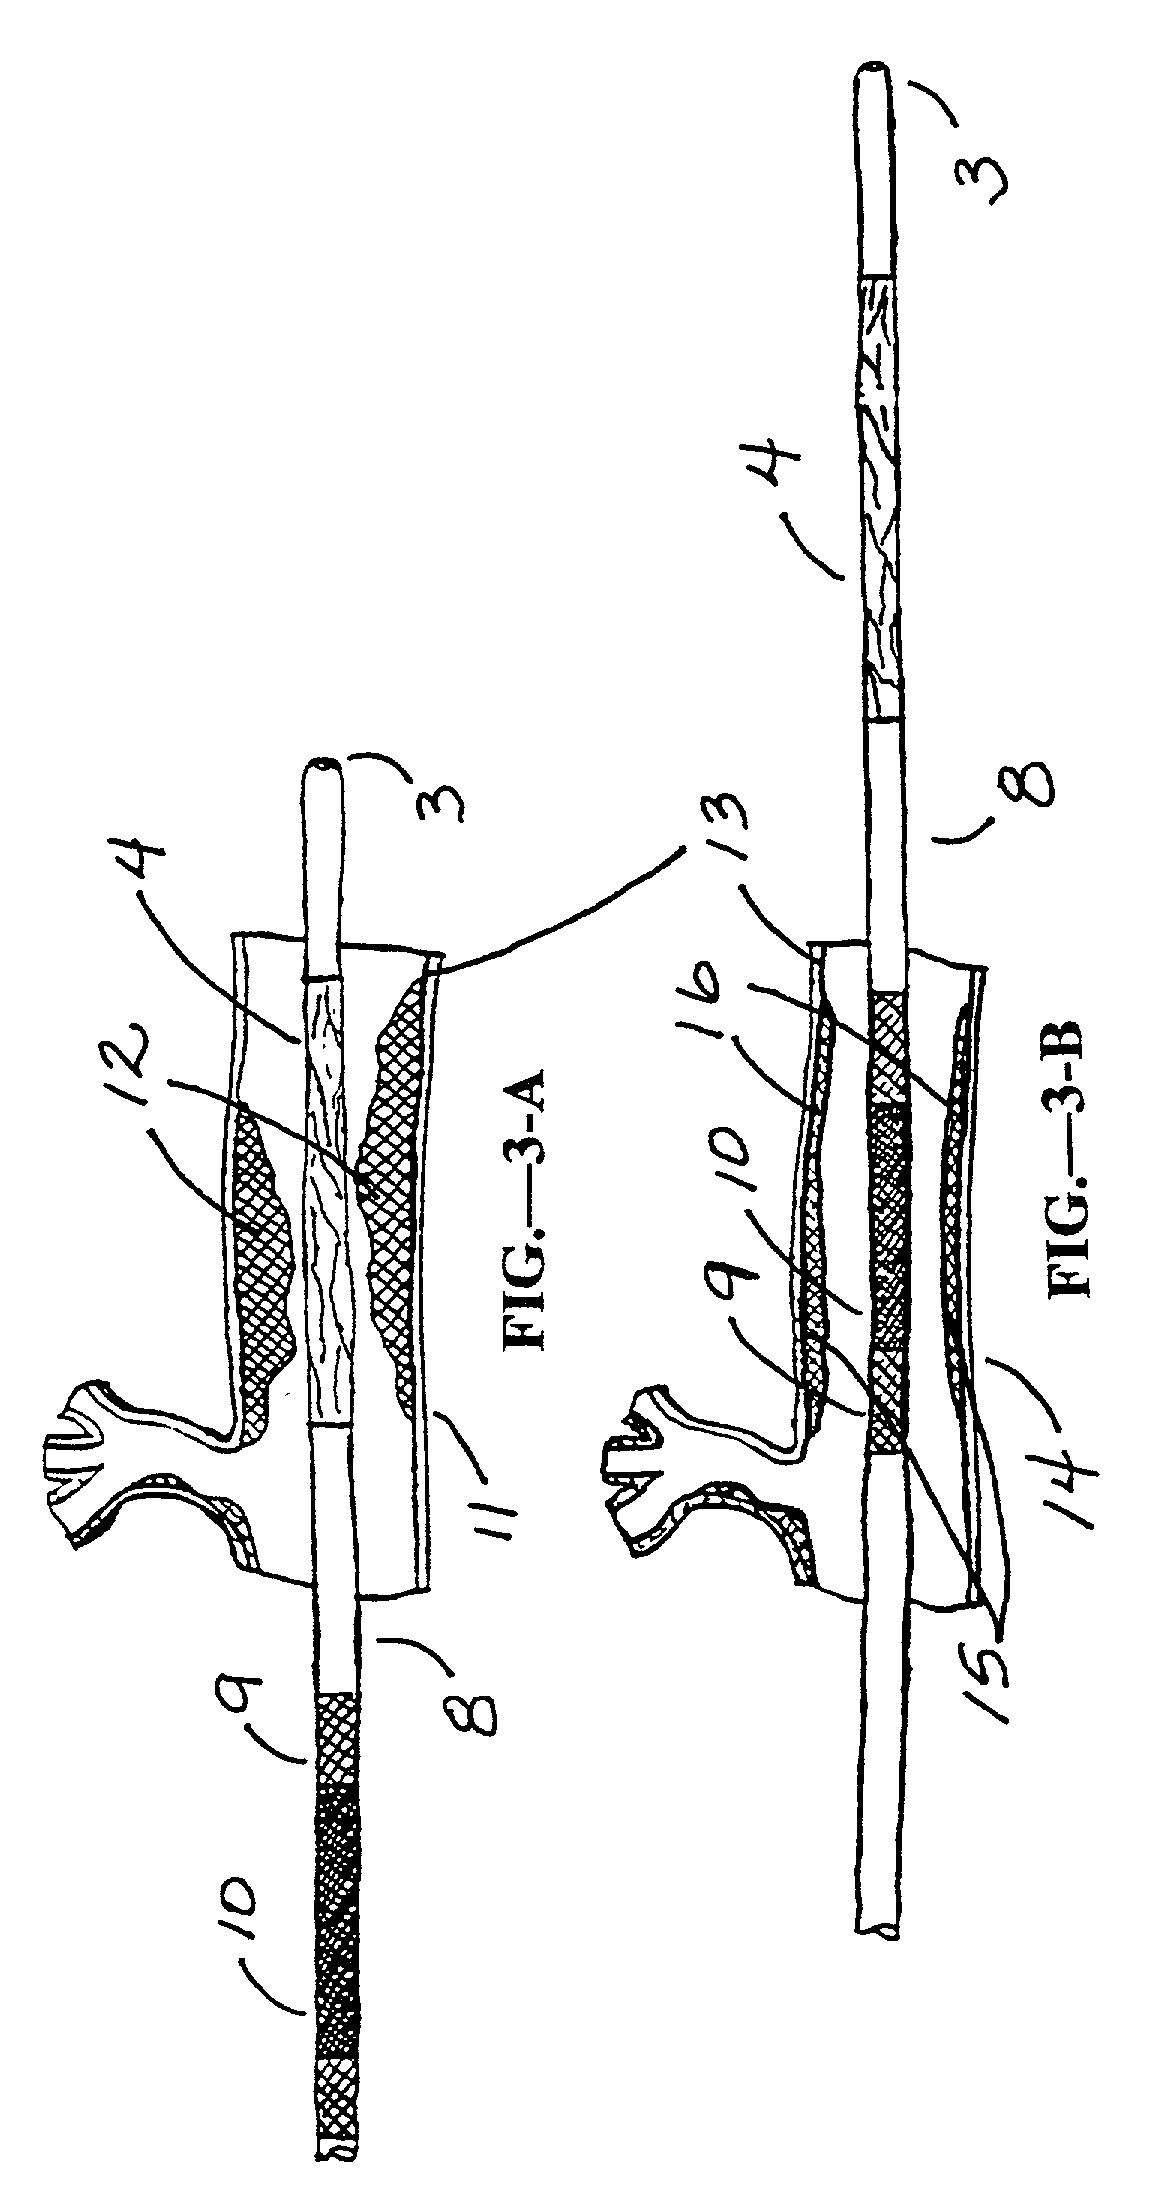 Dilating and support apparatus with disease inhibitors and methods for use